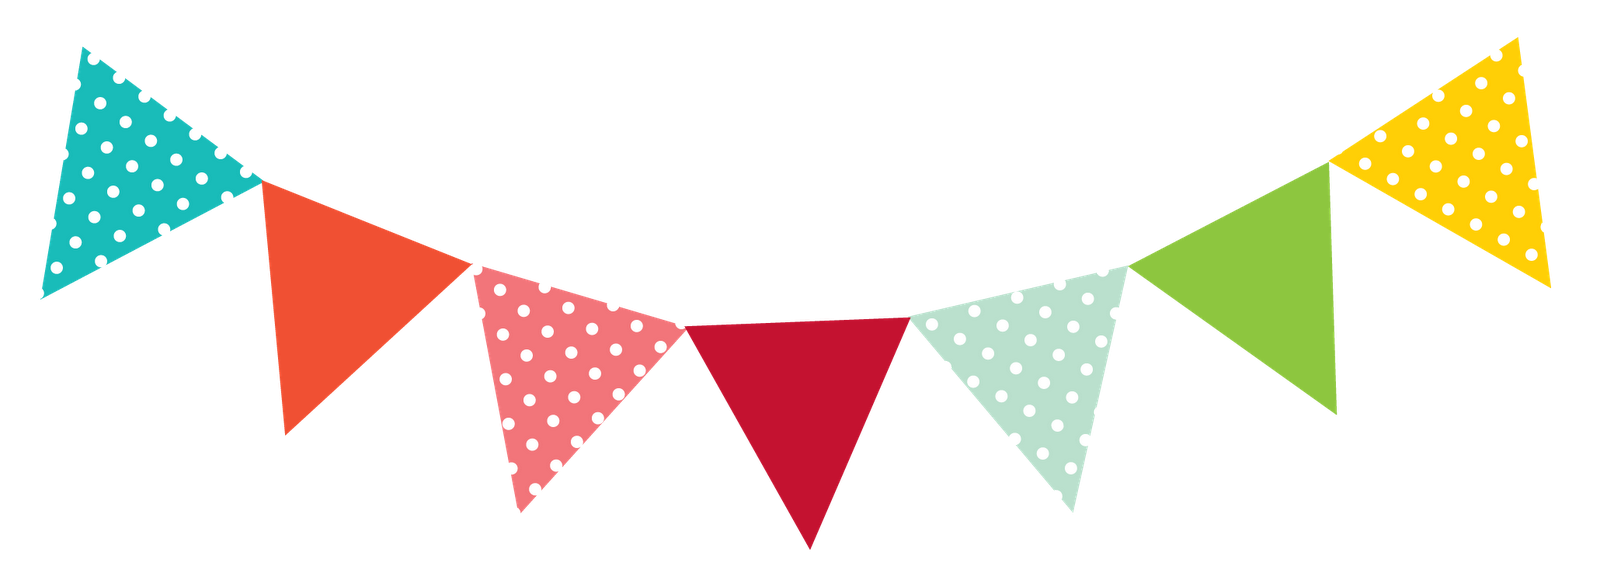 bunting clip art free download - photo #1